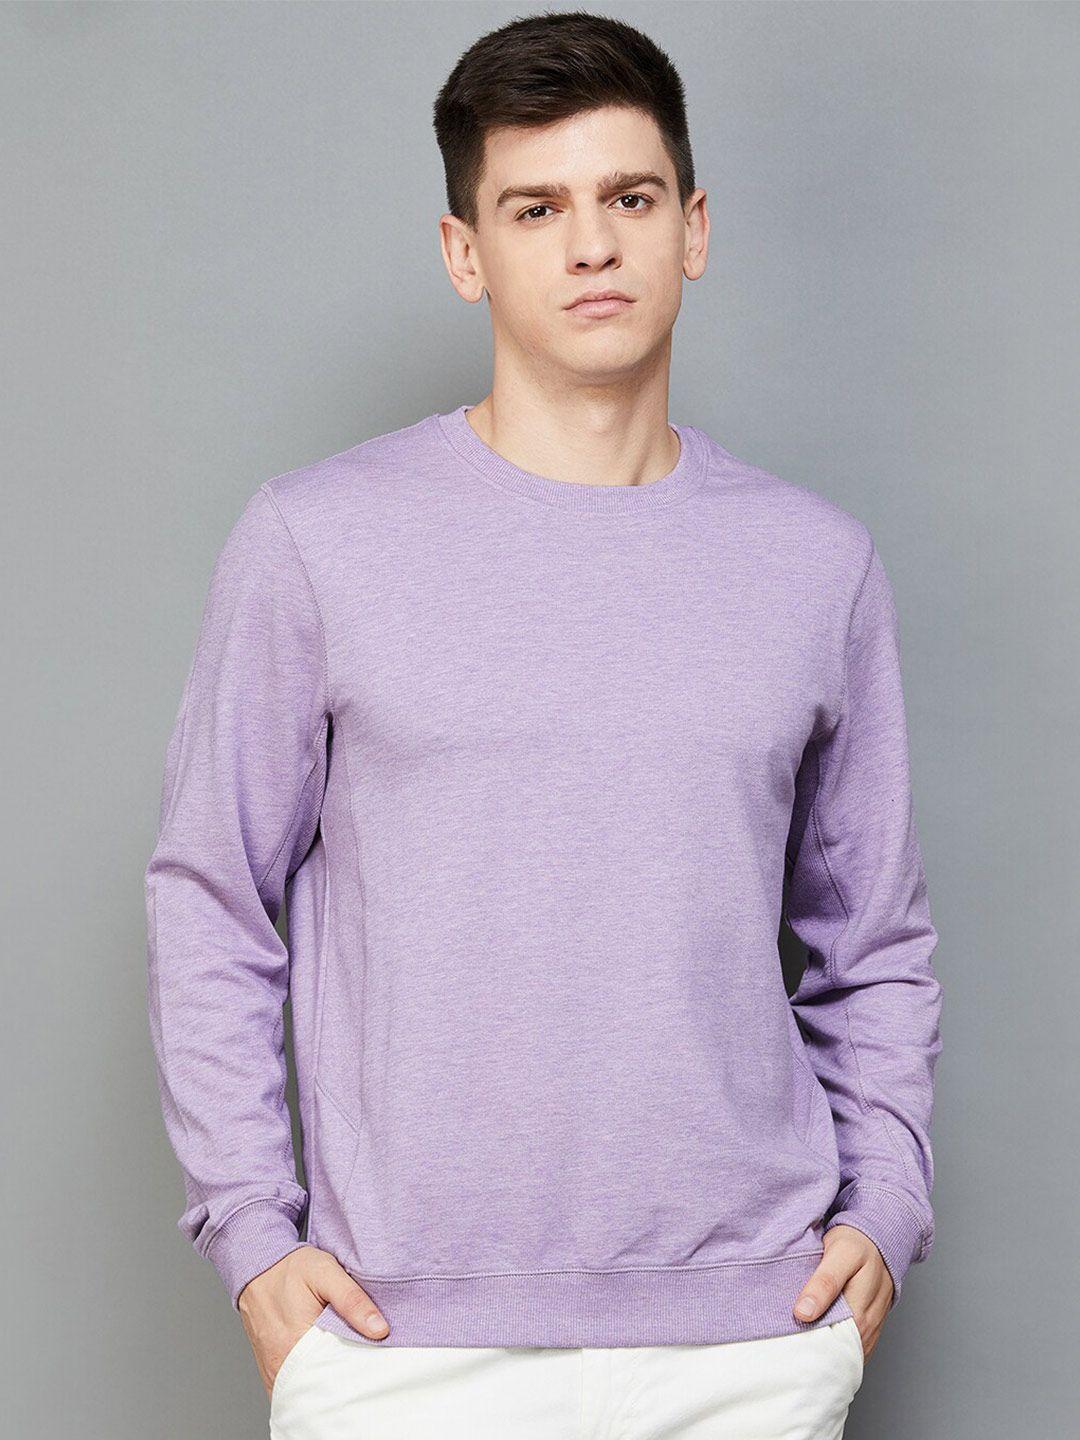 code by lifestyle round neck pullover